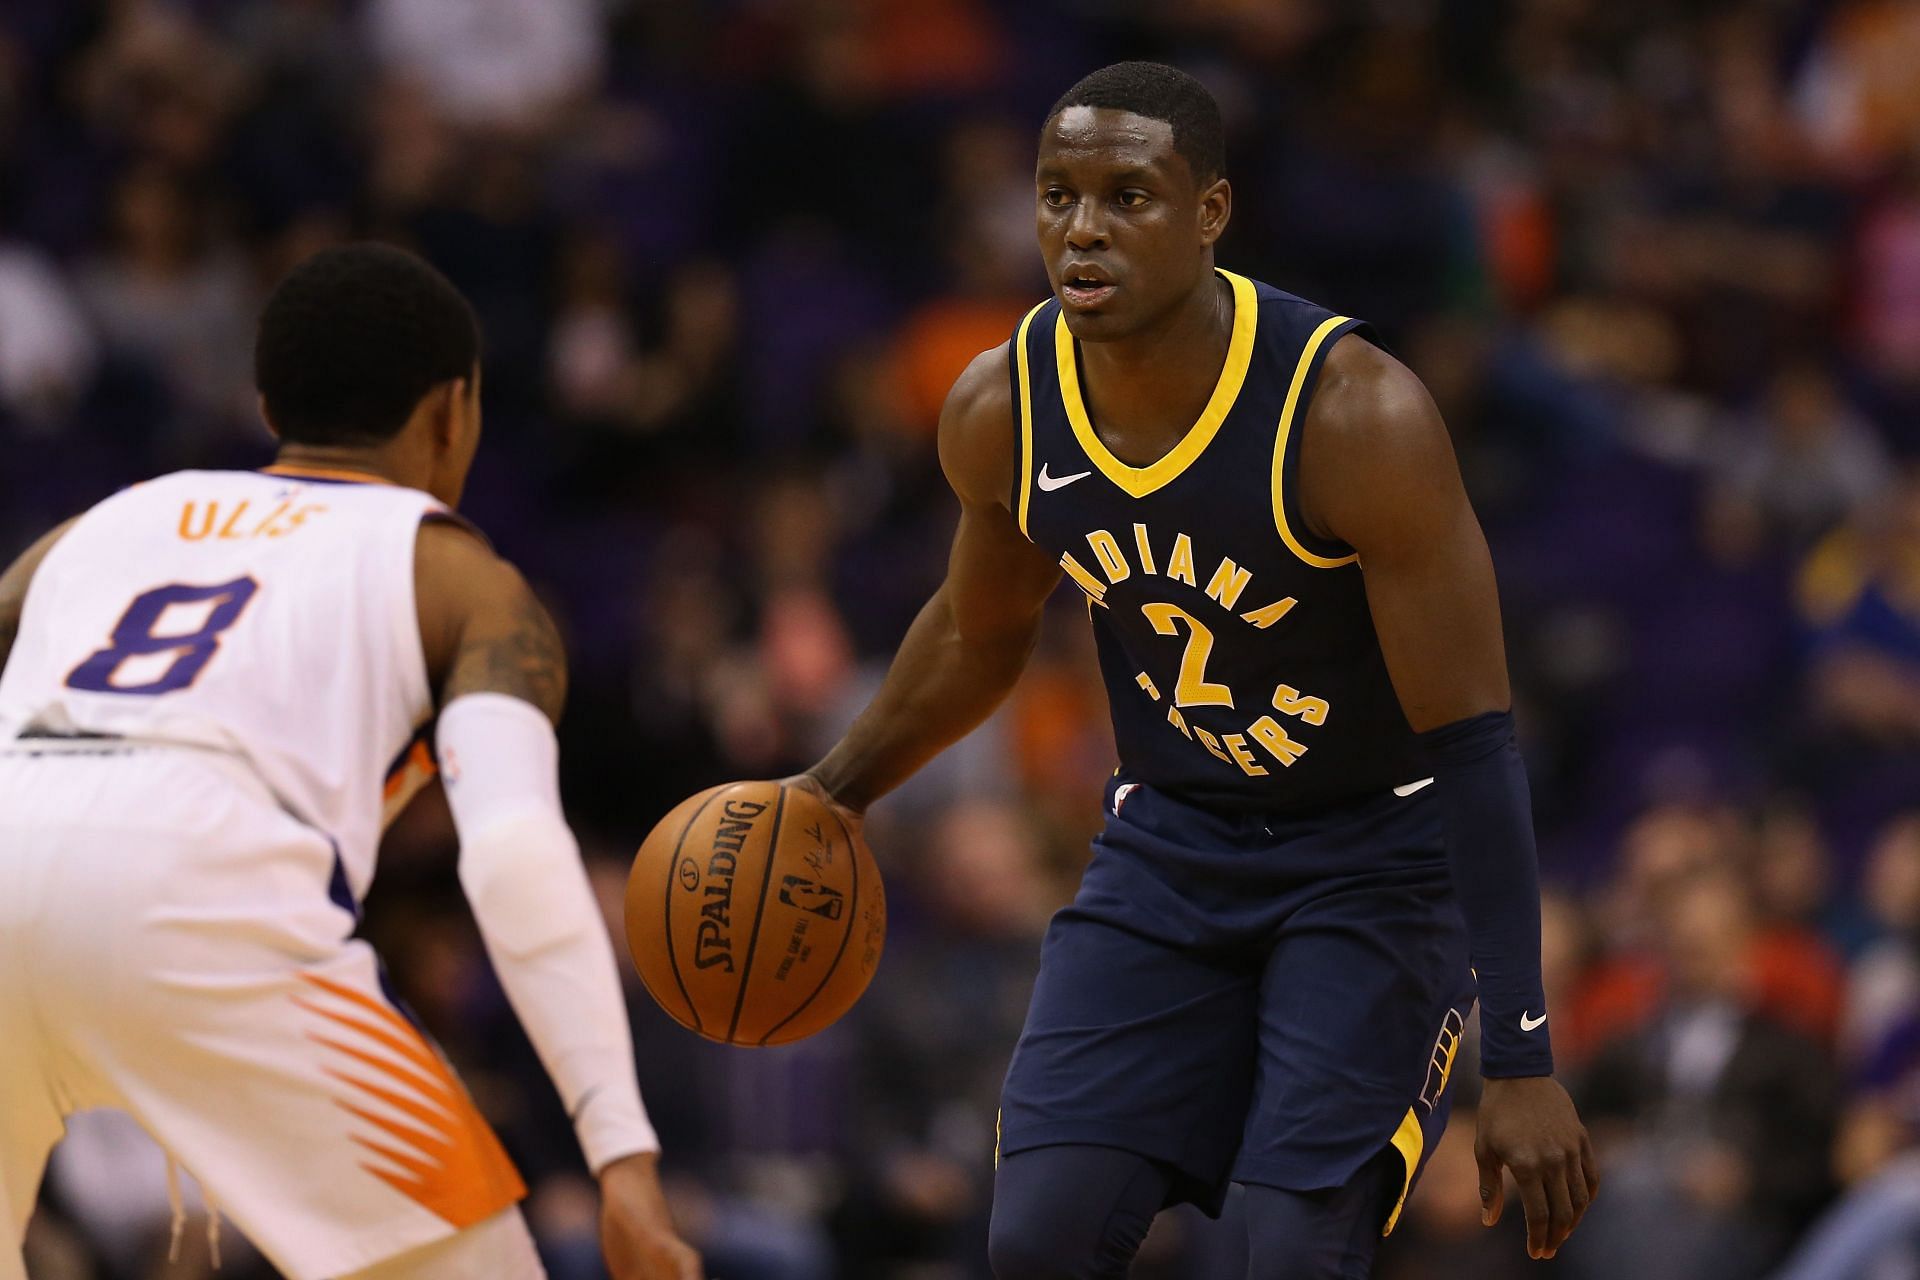 3 NBA players who are Jehovah's Witnesses: Danny Granger, Darren Collison,  and more